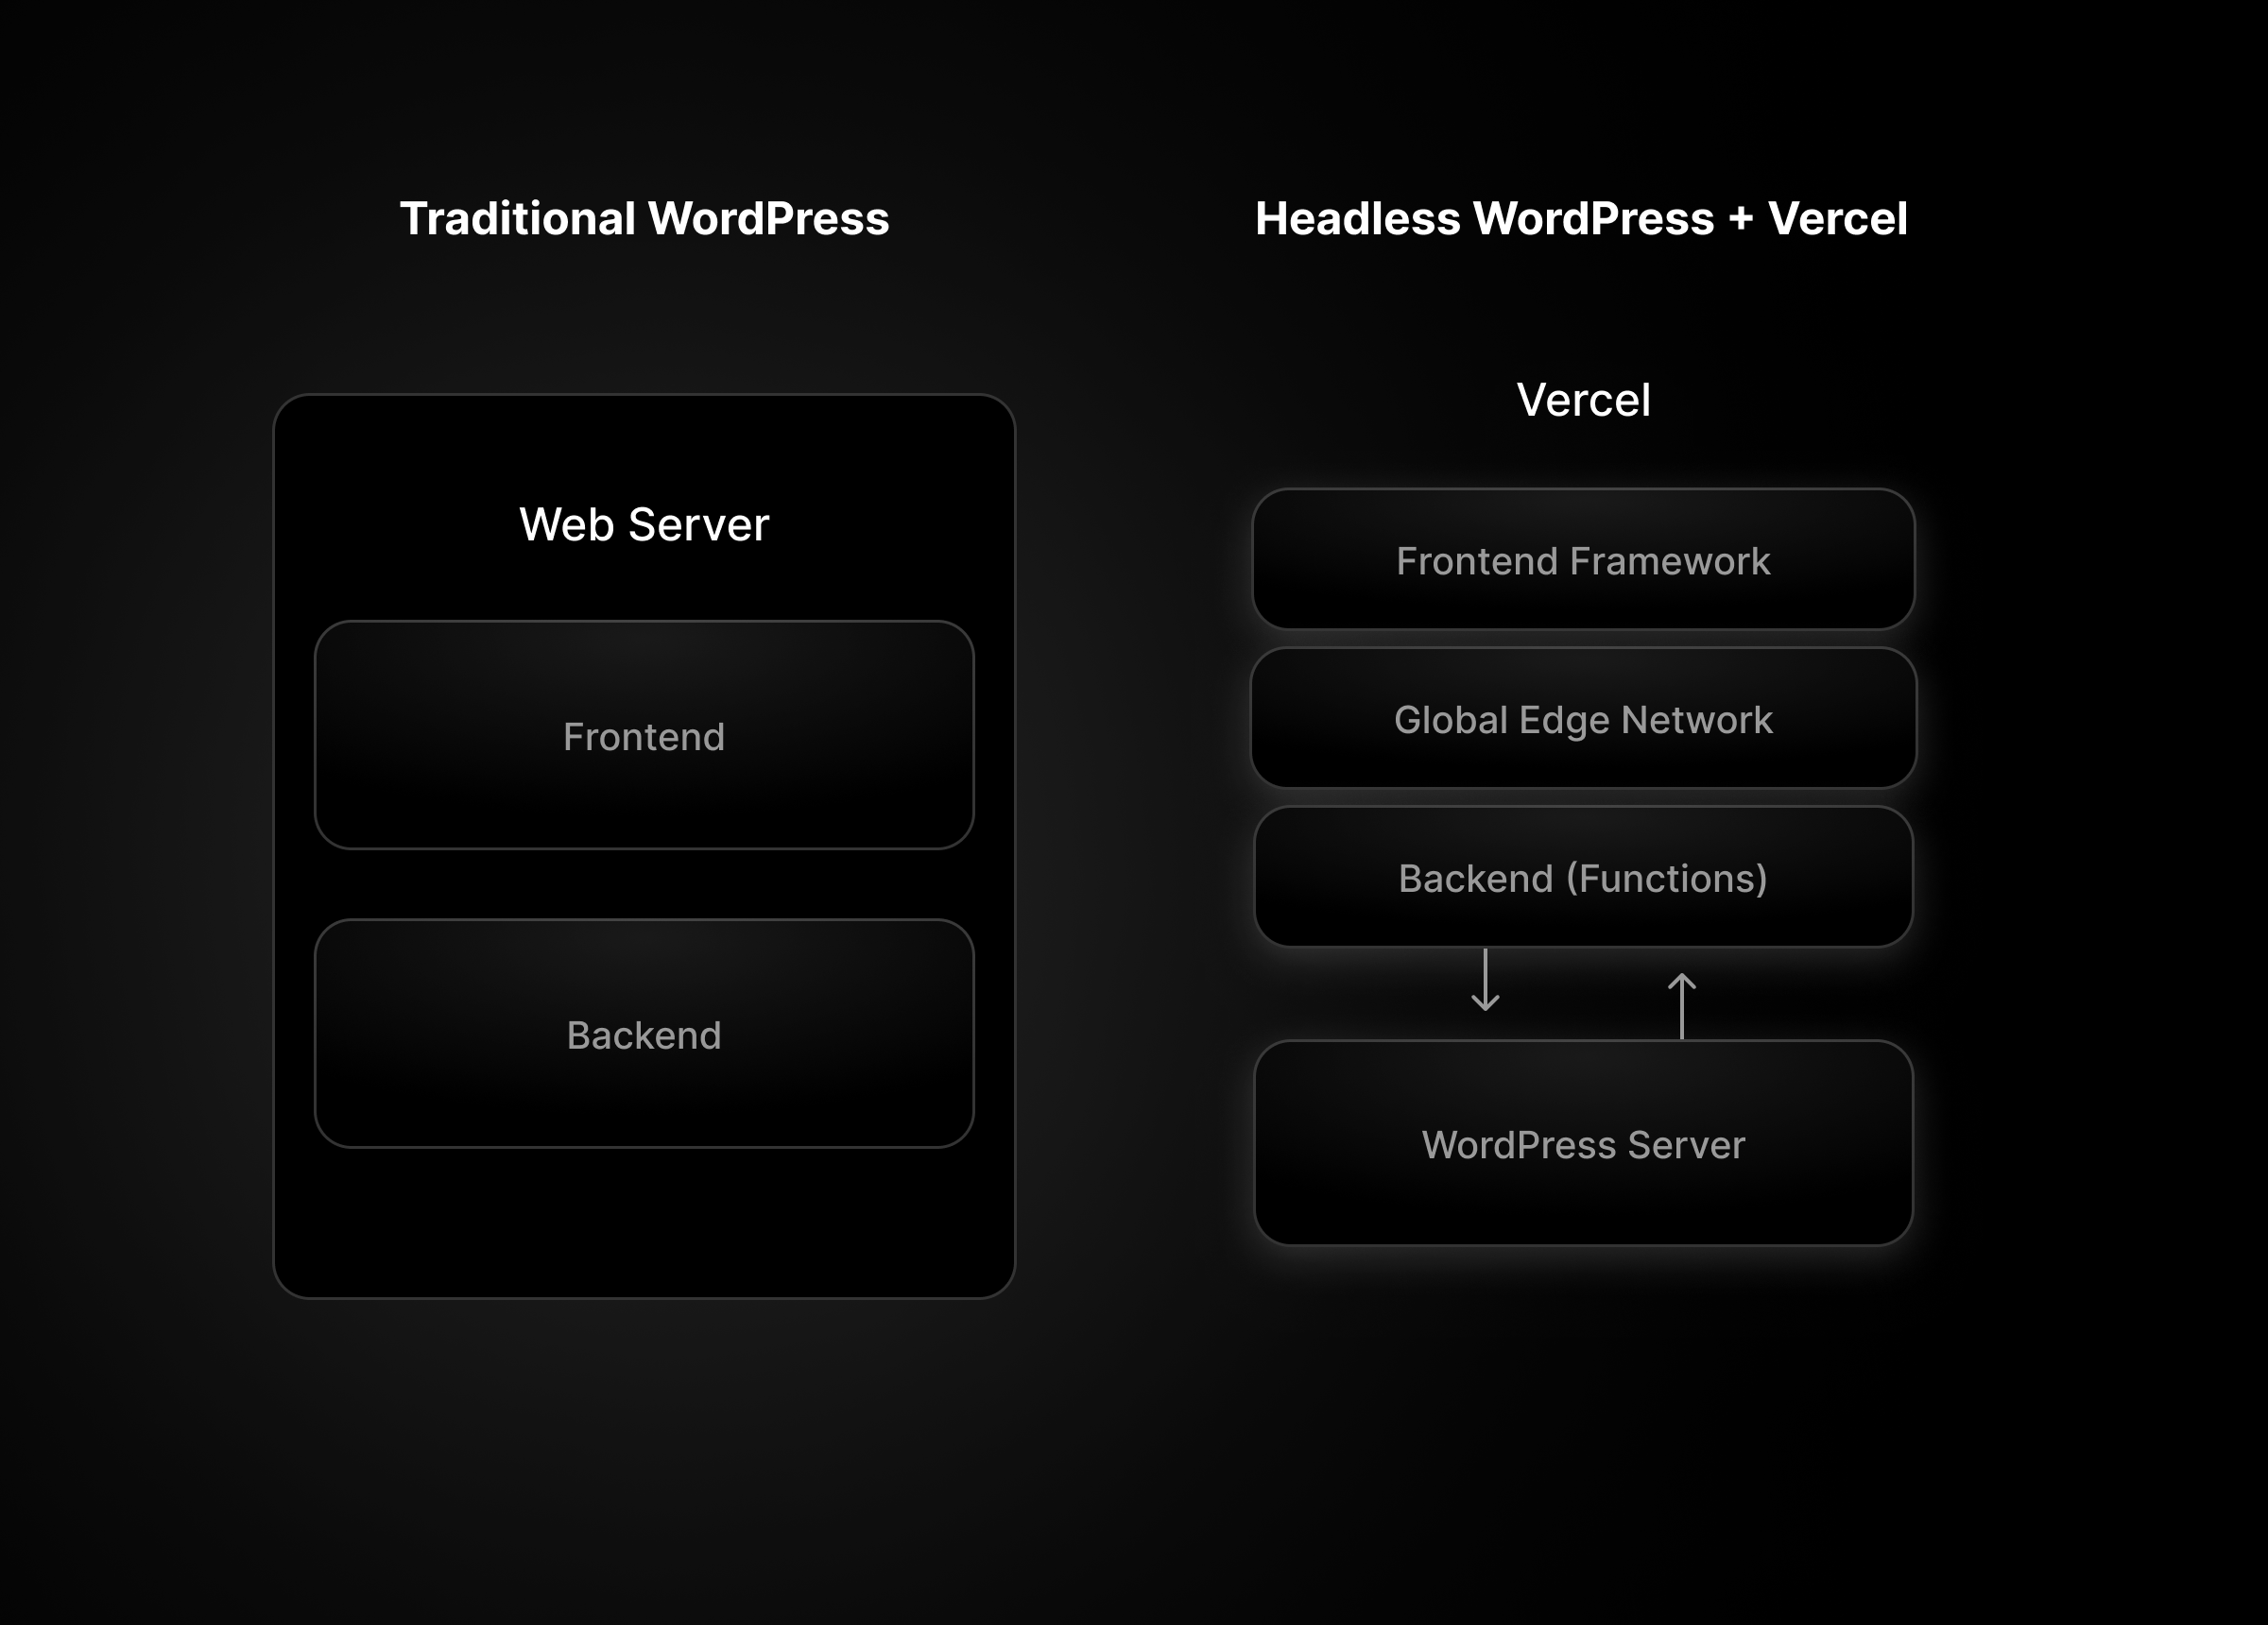 Comparing traditional WordPress architecture and headless WordPress with Vercel frontend.